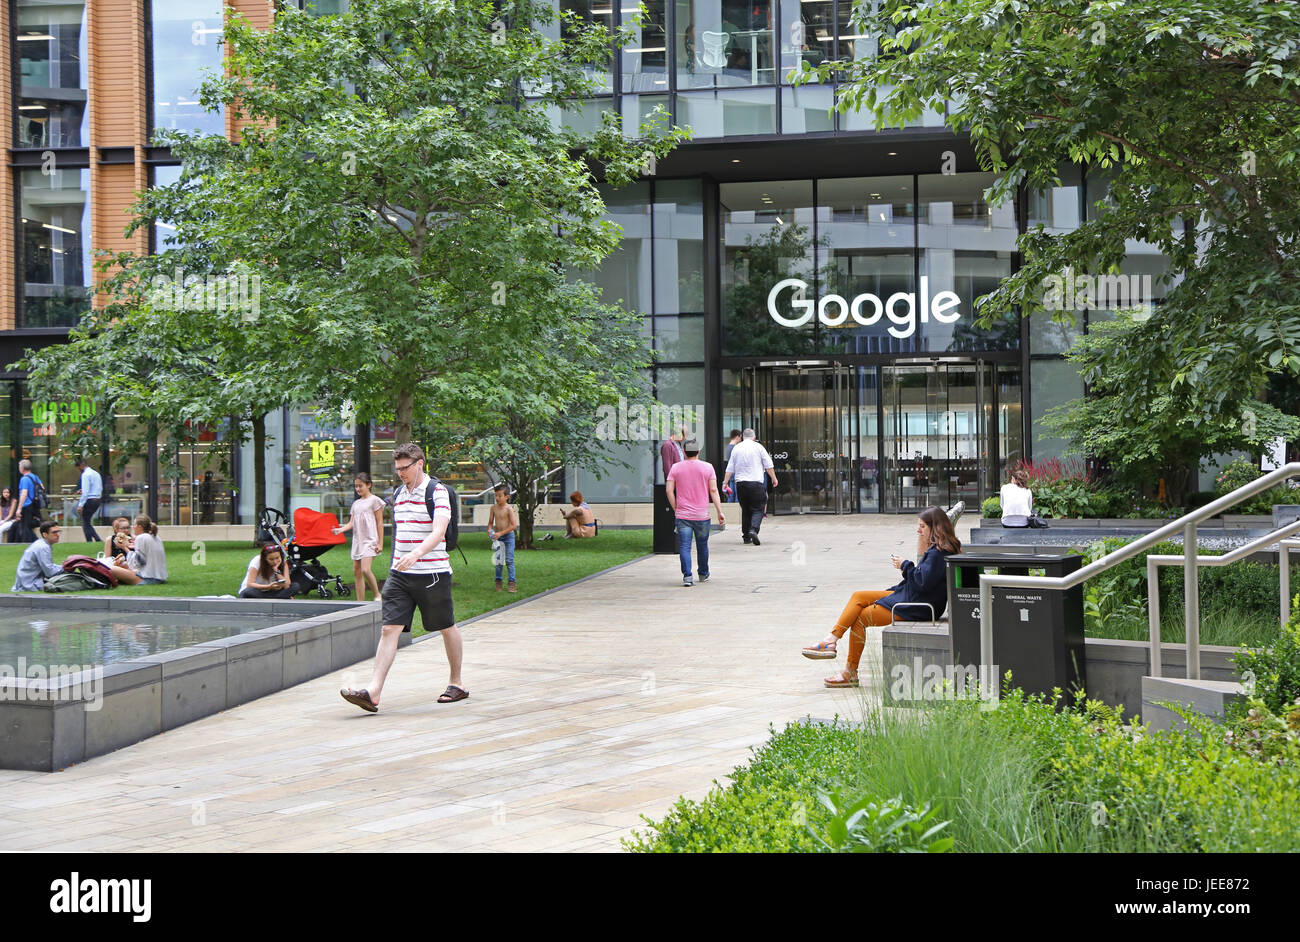 The entrance to Google's new UK headquarters building in St Pancras Square, London. Shows Google sign above door. Stock Photo